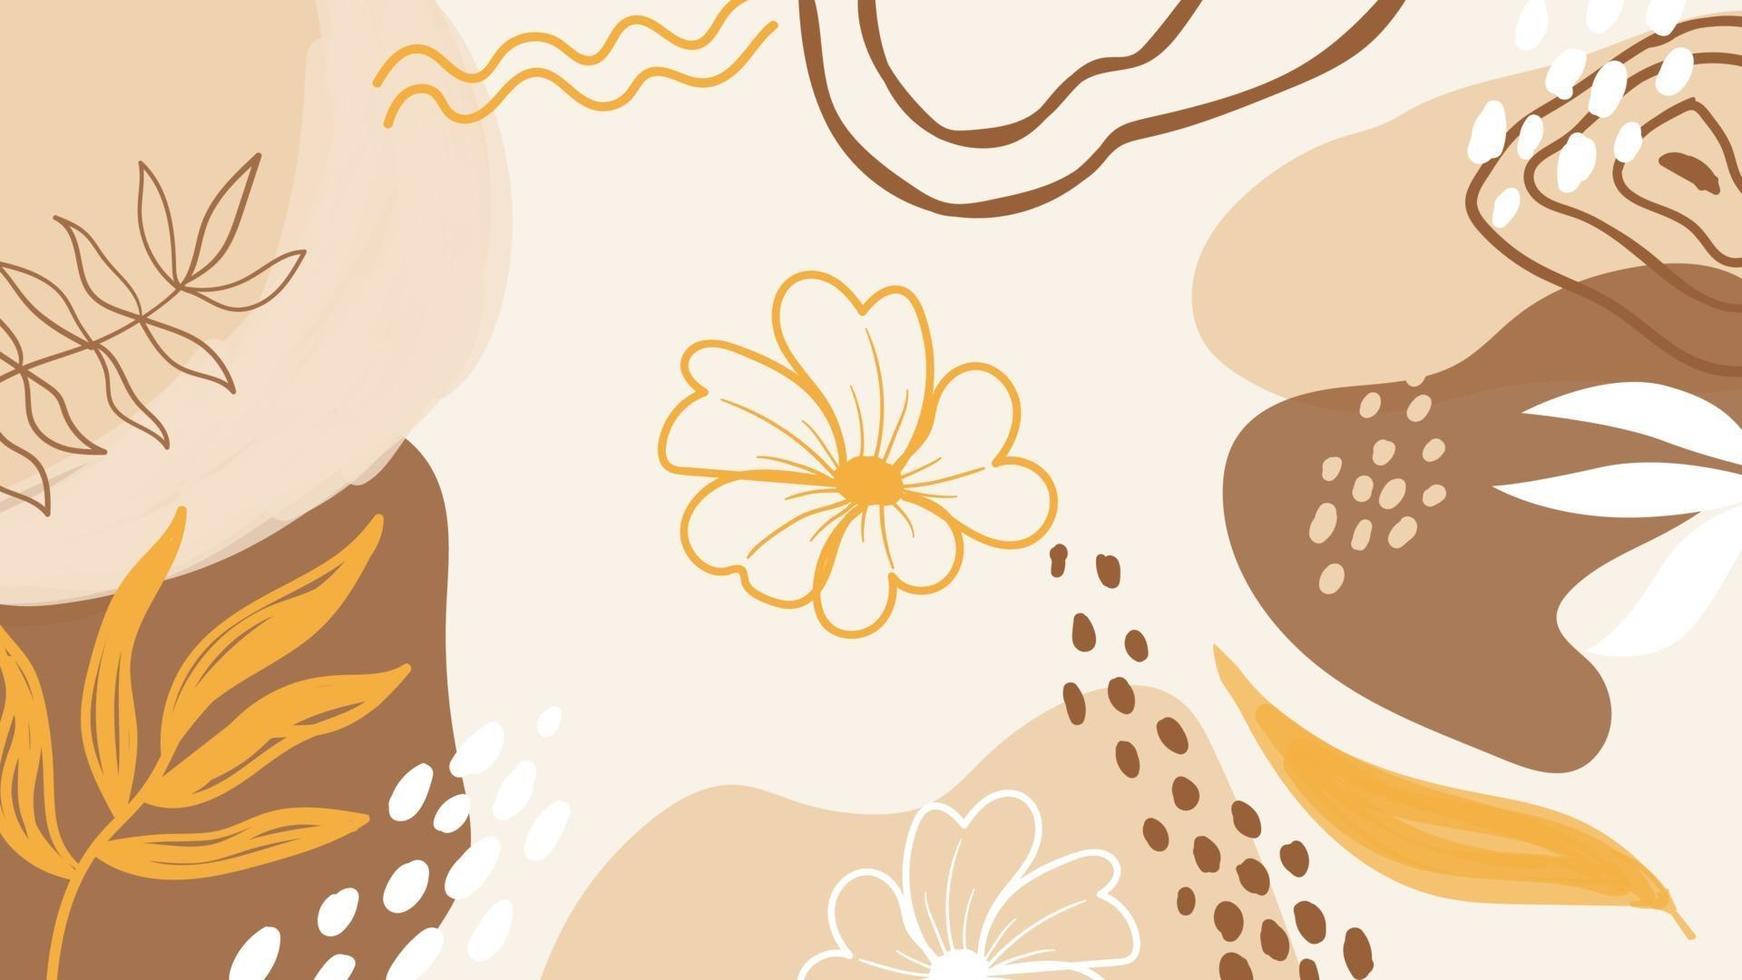 Hand drawn abstract wallpaper with organic shapes vector